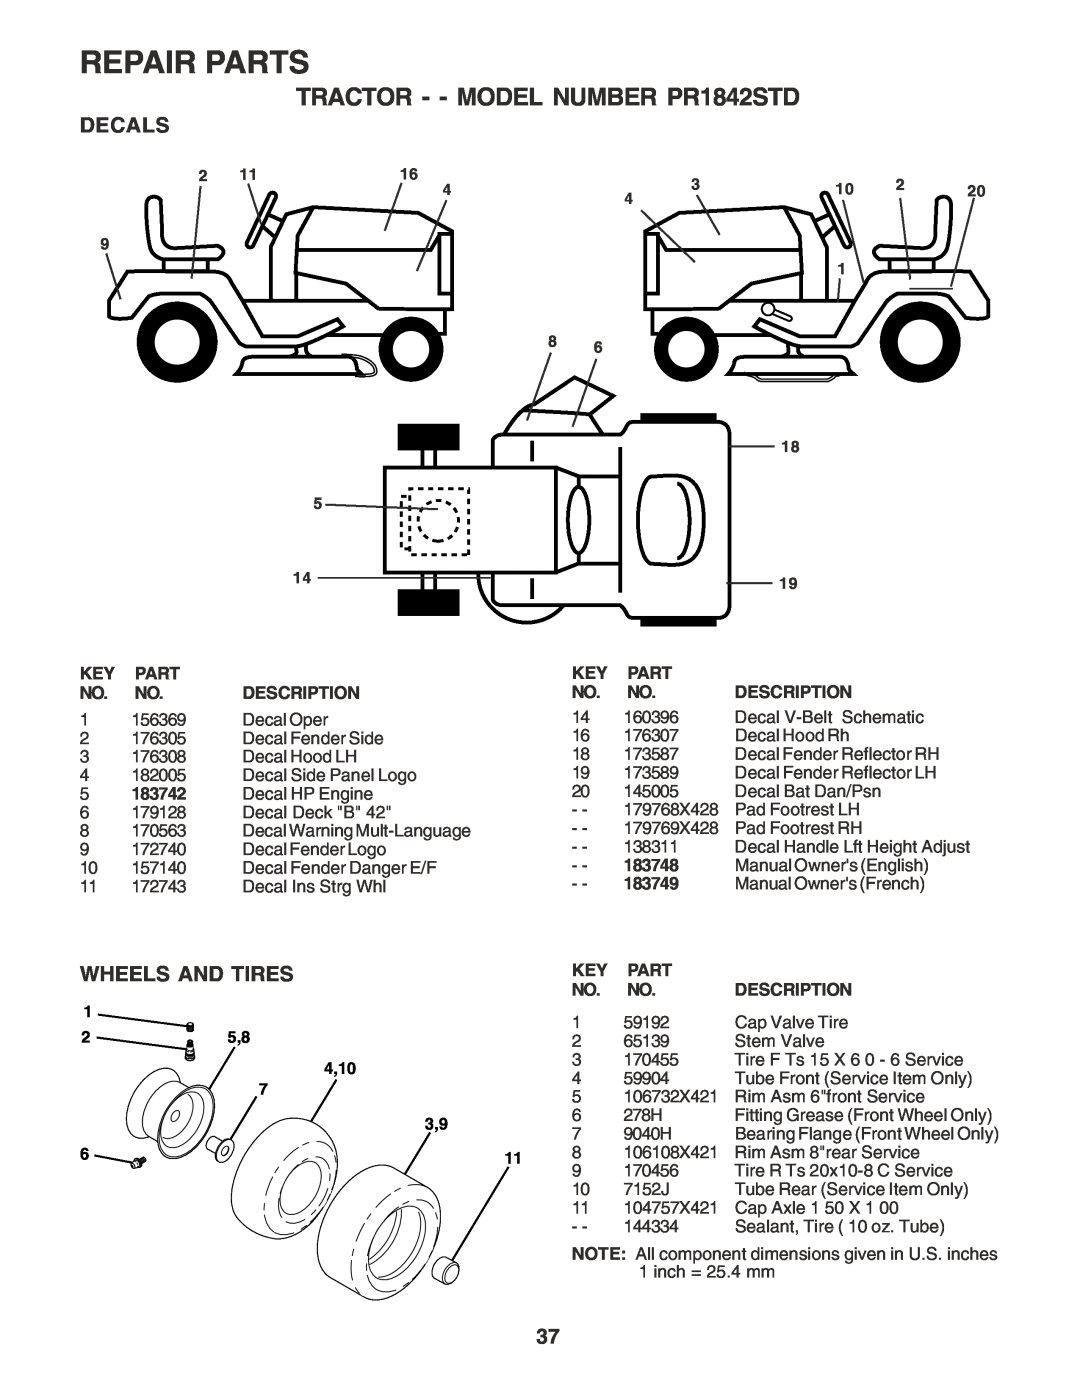 Poulan 183748 owner manual Decals, Wheels And Tires, Repair Parts, TRACTOR - - MODEL NUMBER PR1842STD 